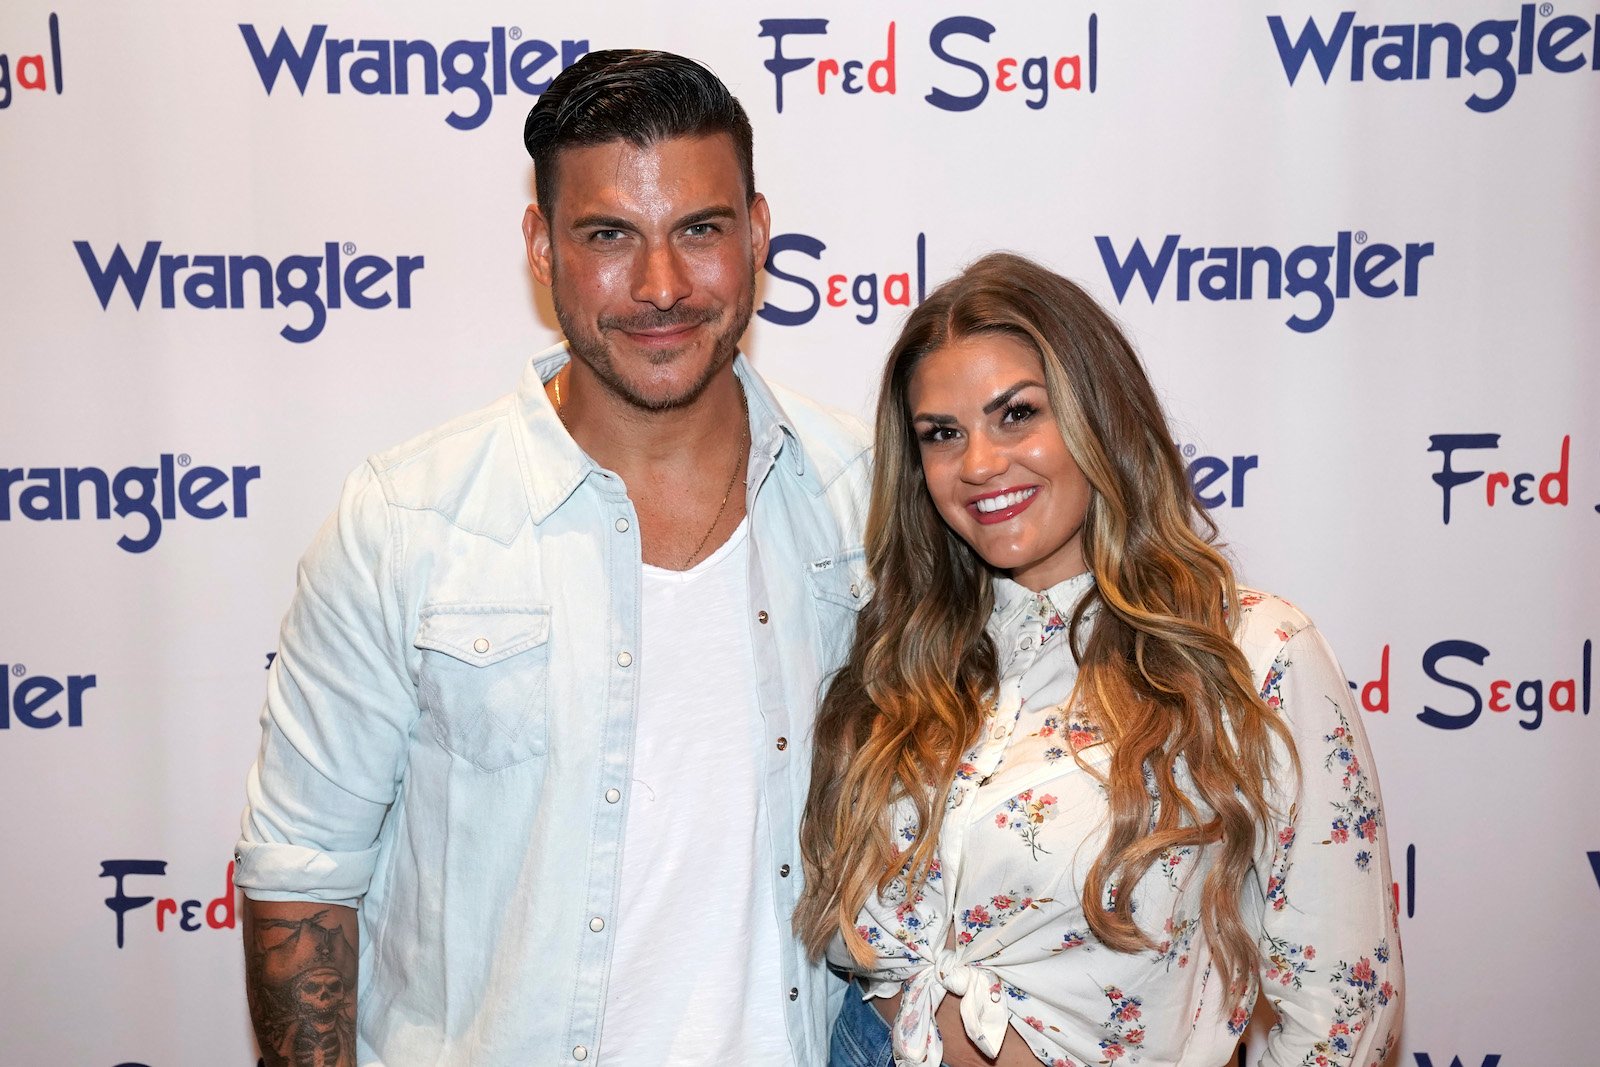 Brittany Cartwright from Vanderpump Rules shared what Jax Taylor is like as a dad